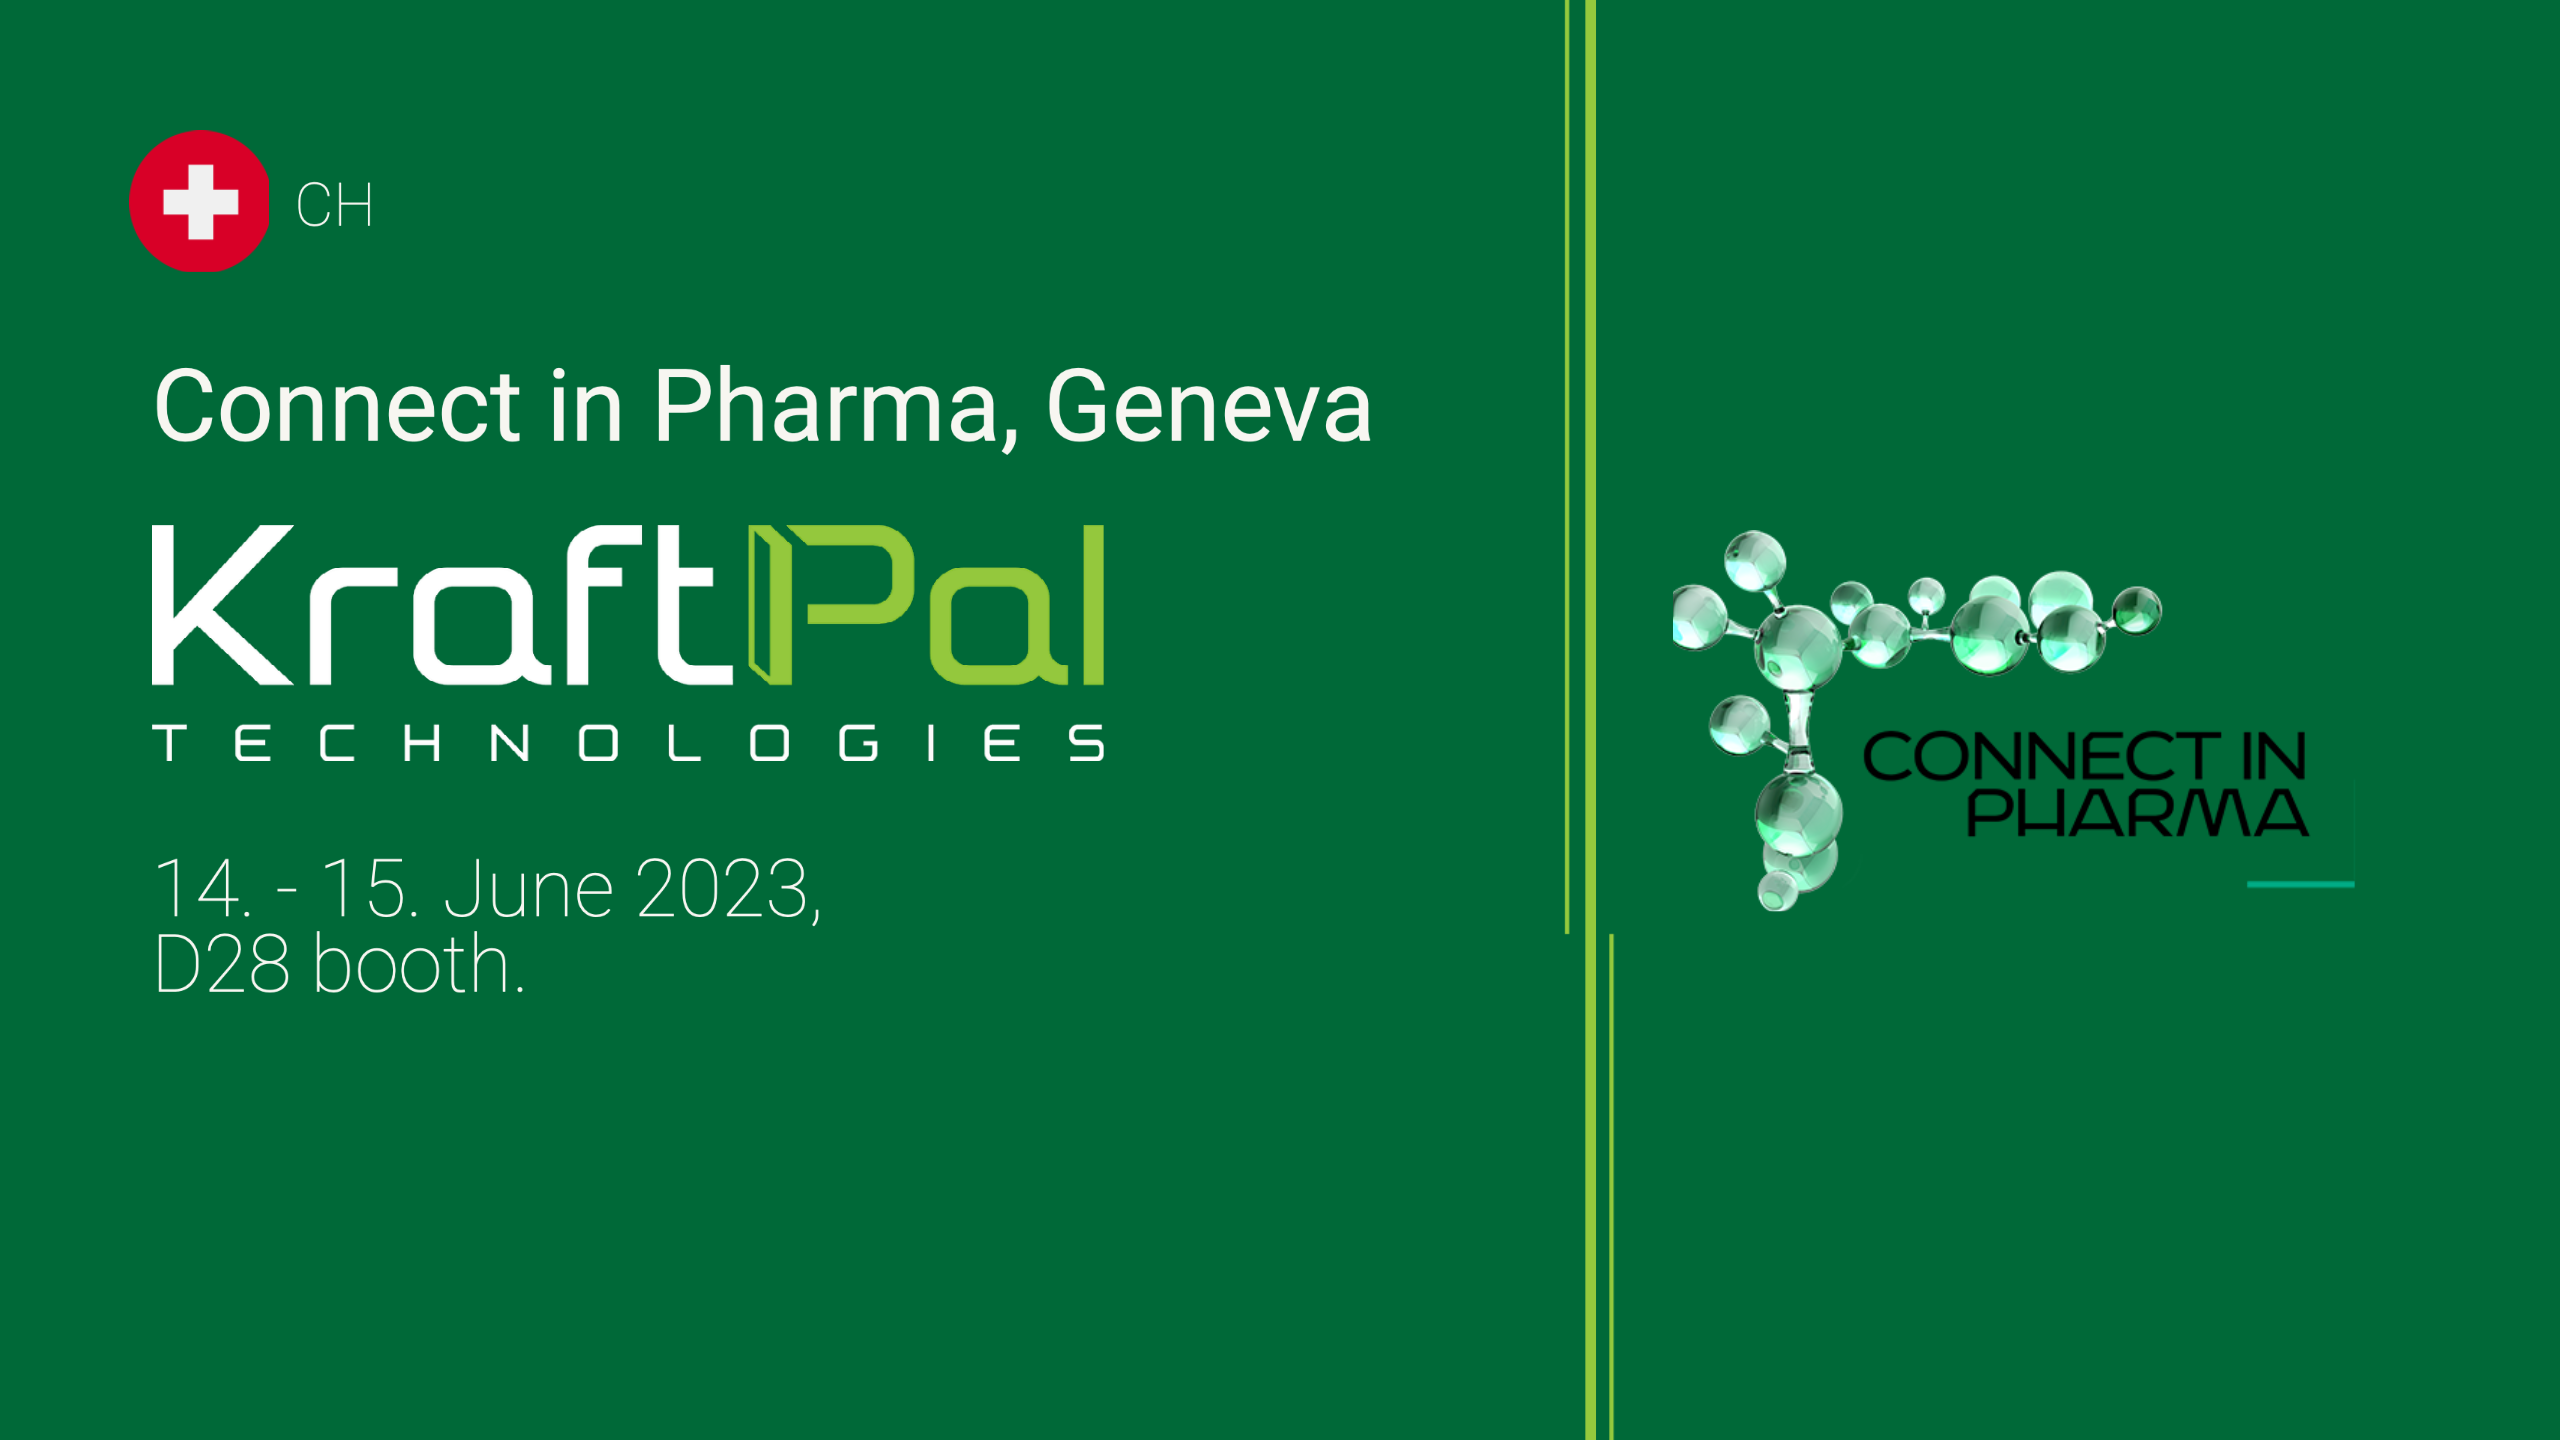 KraftPal Technologies will be unveiling logistic innovation in corrugated carboard pallets at Connect in Pharma 2023 in Geneva this month.